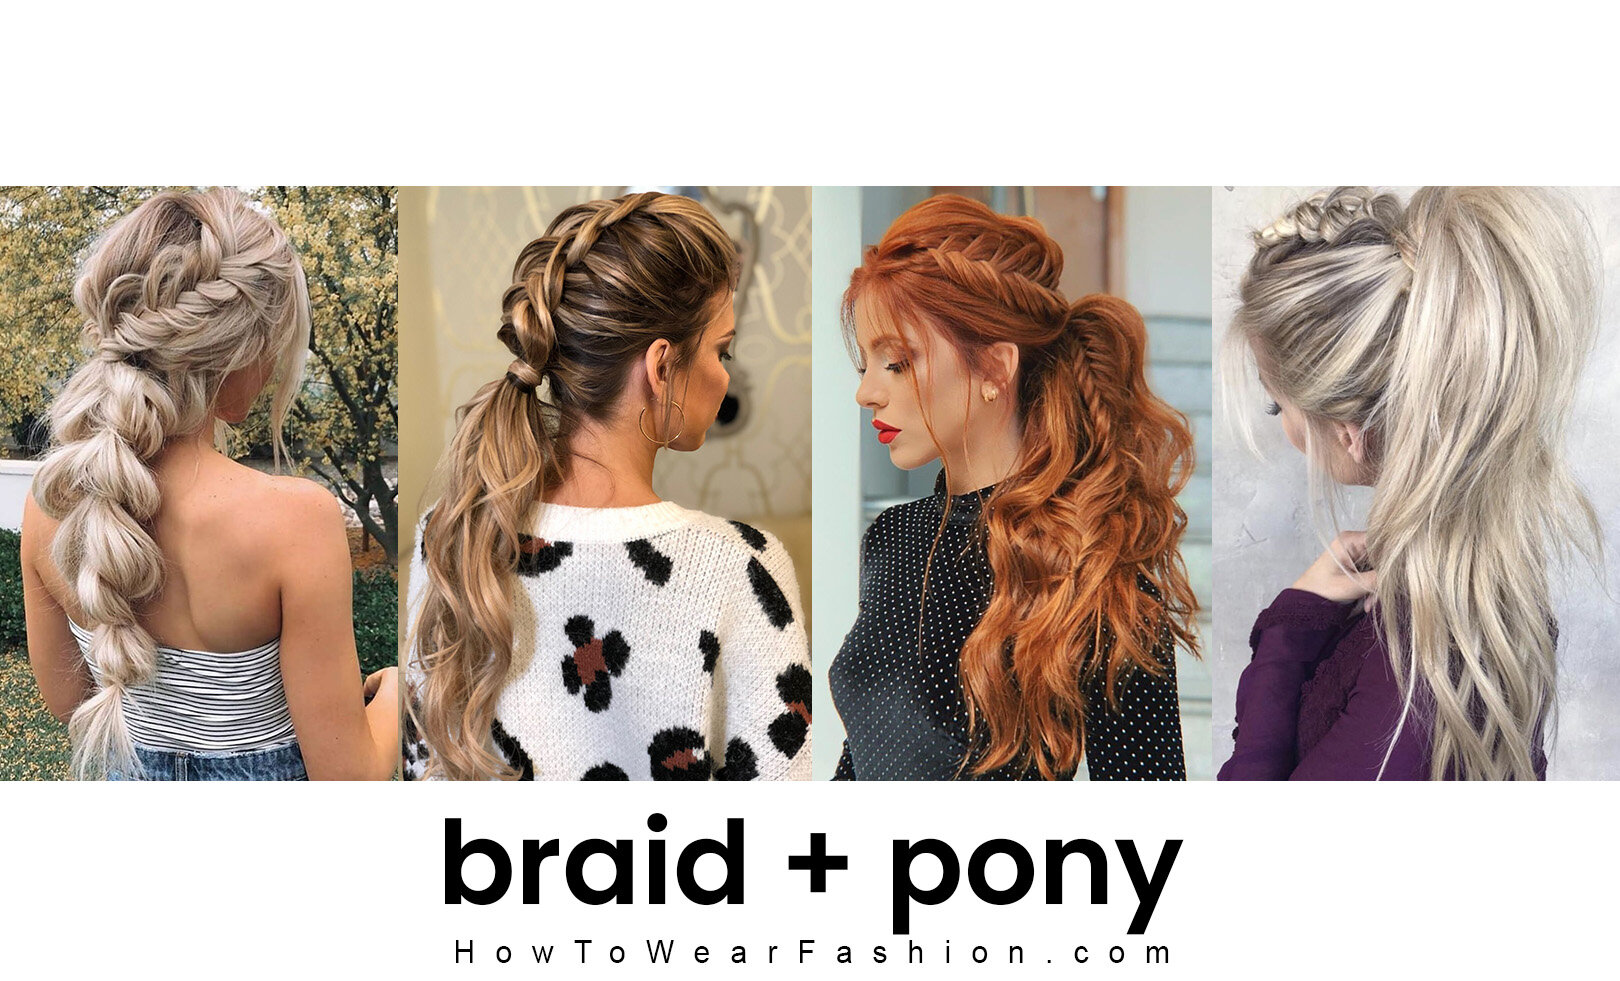 French Front: Subtle Side Ponytail - Cute Girls Hairstyles